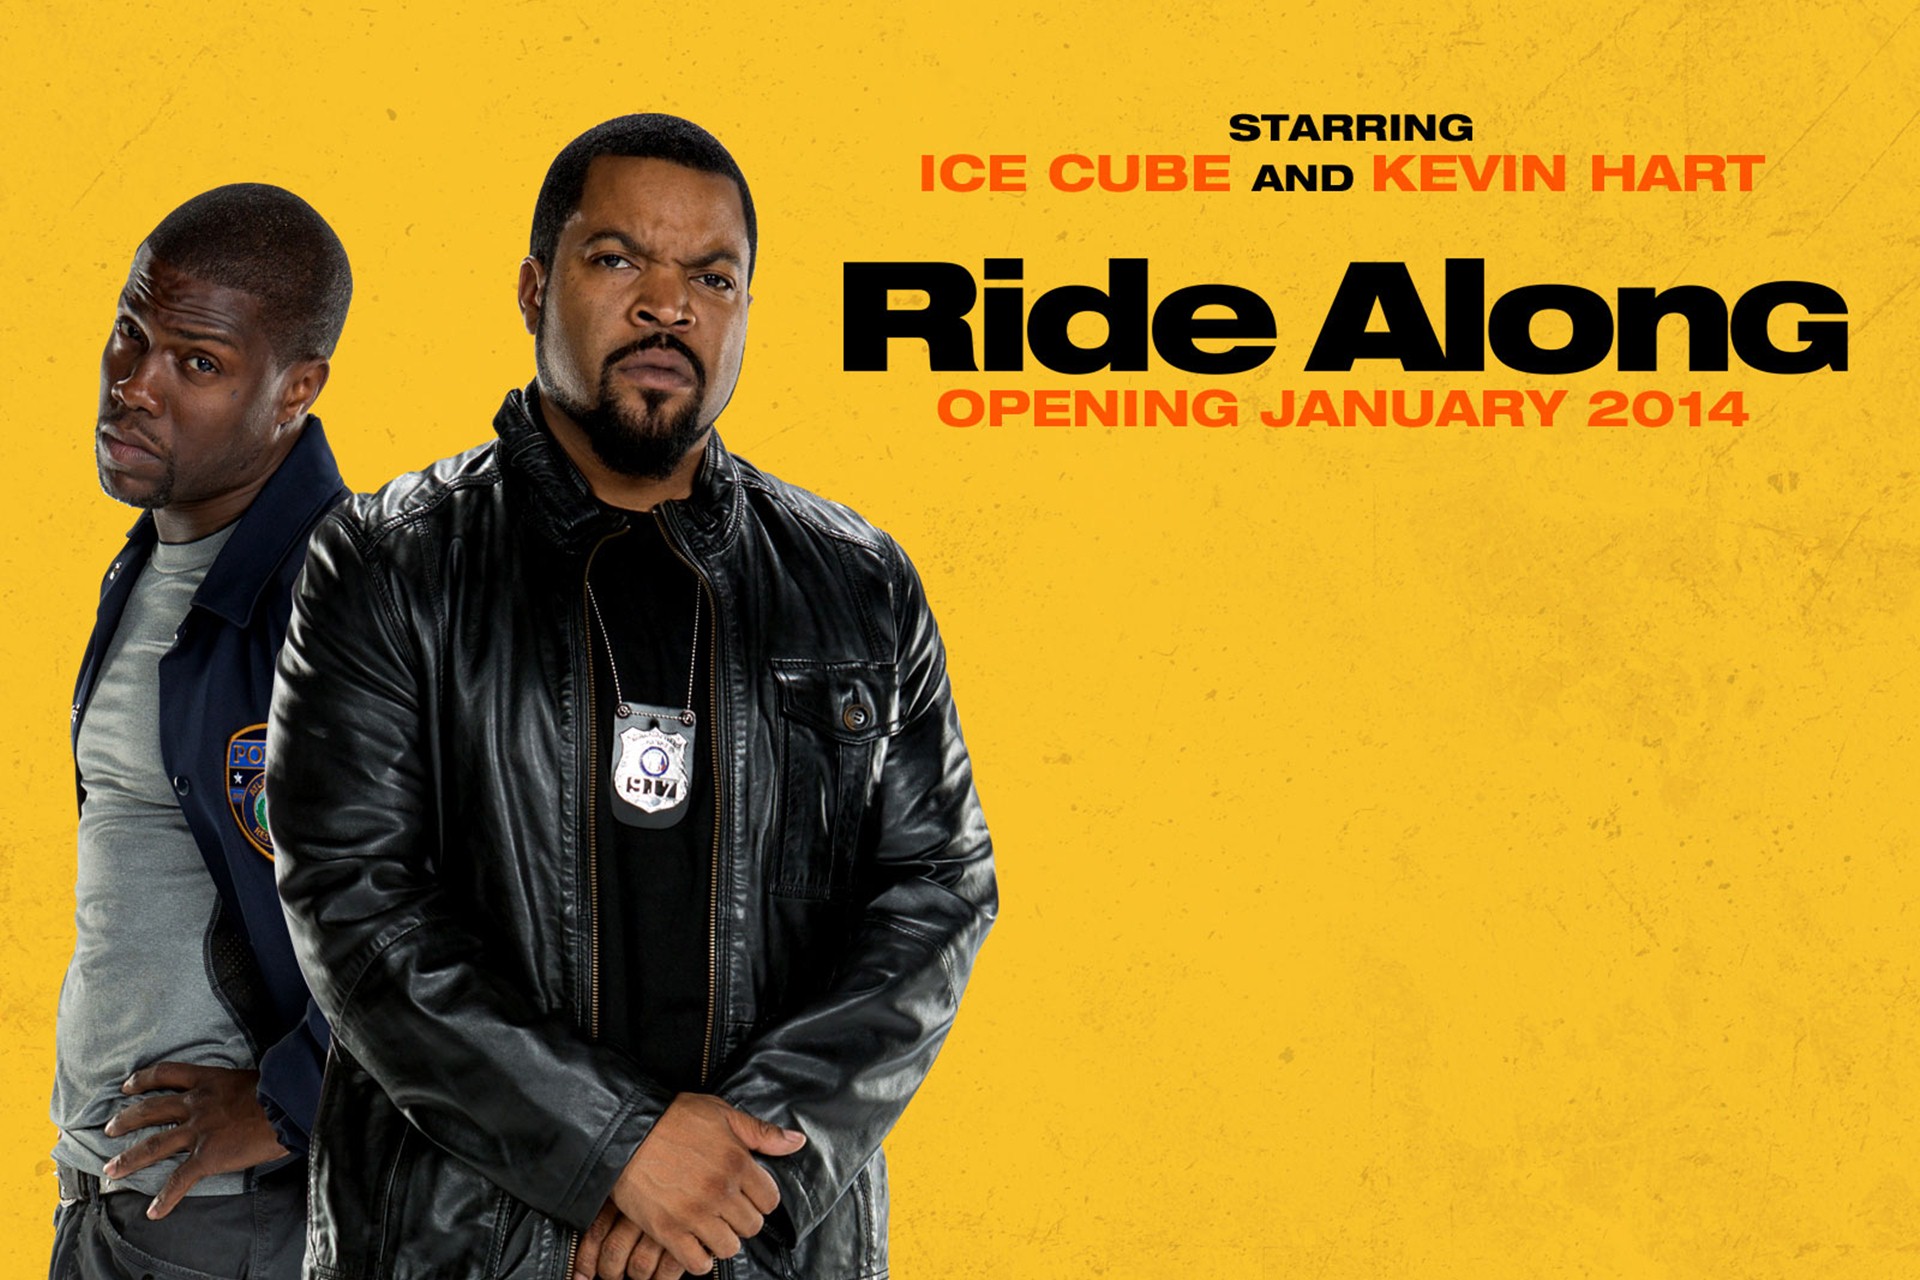 Ride Along Ice Cube Celebrity Kevin Hart Cop Police 1920x1280